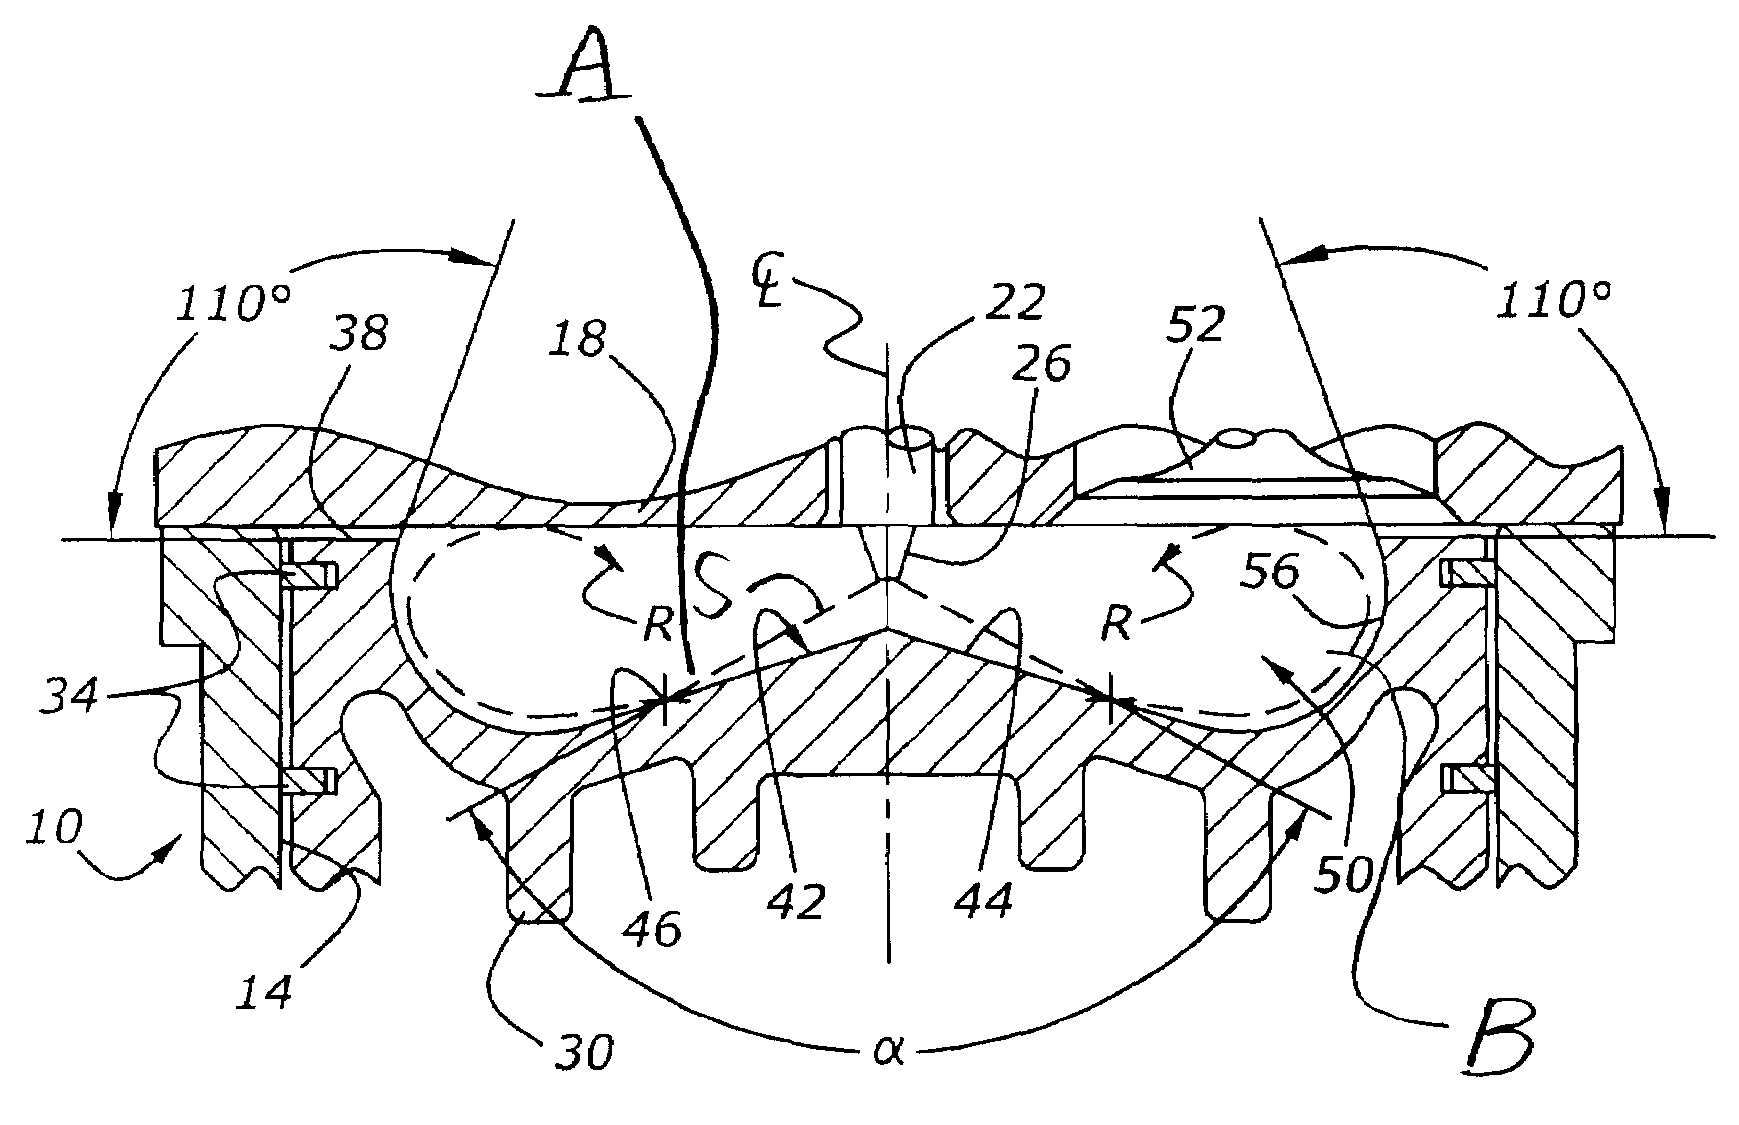 Diesel combustion system with re-entrant piston bowl